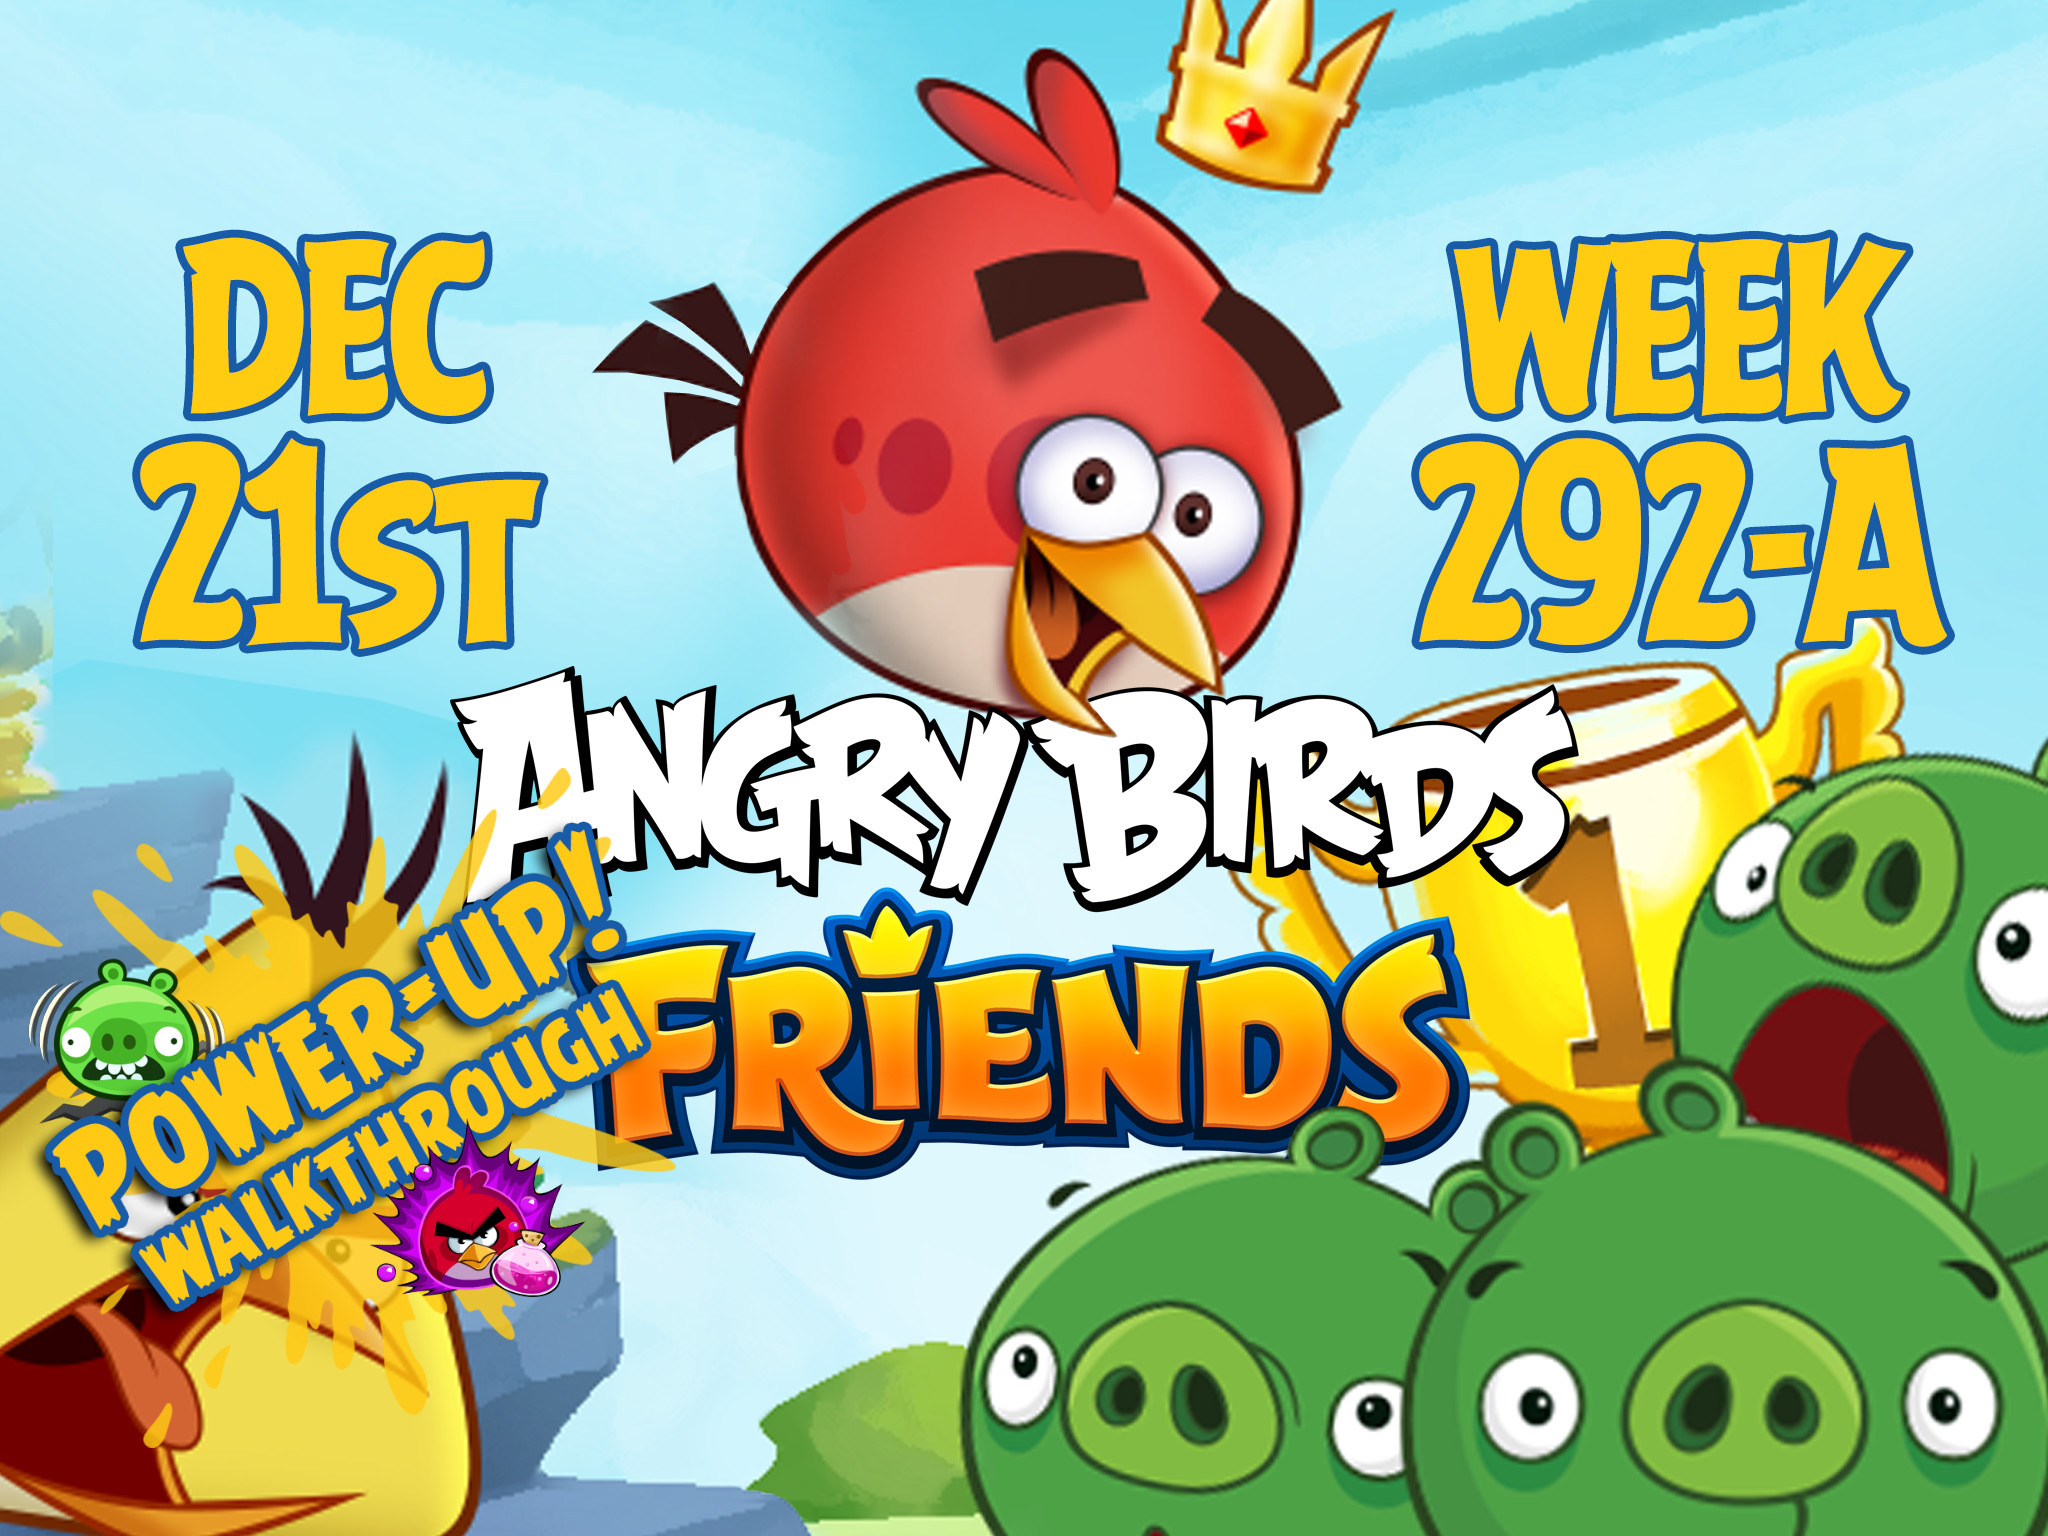 Angry Birds Friends Tournament Week 292-A Feature Image PU